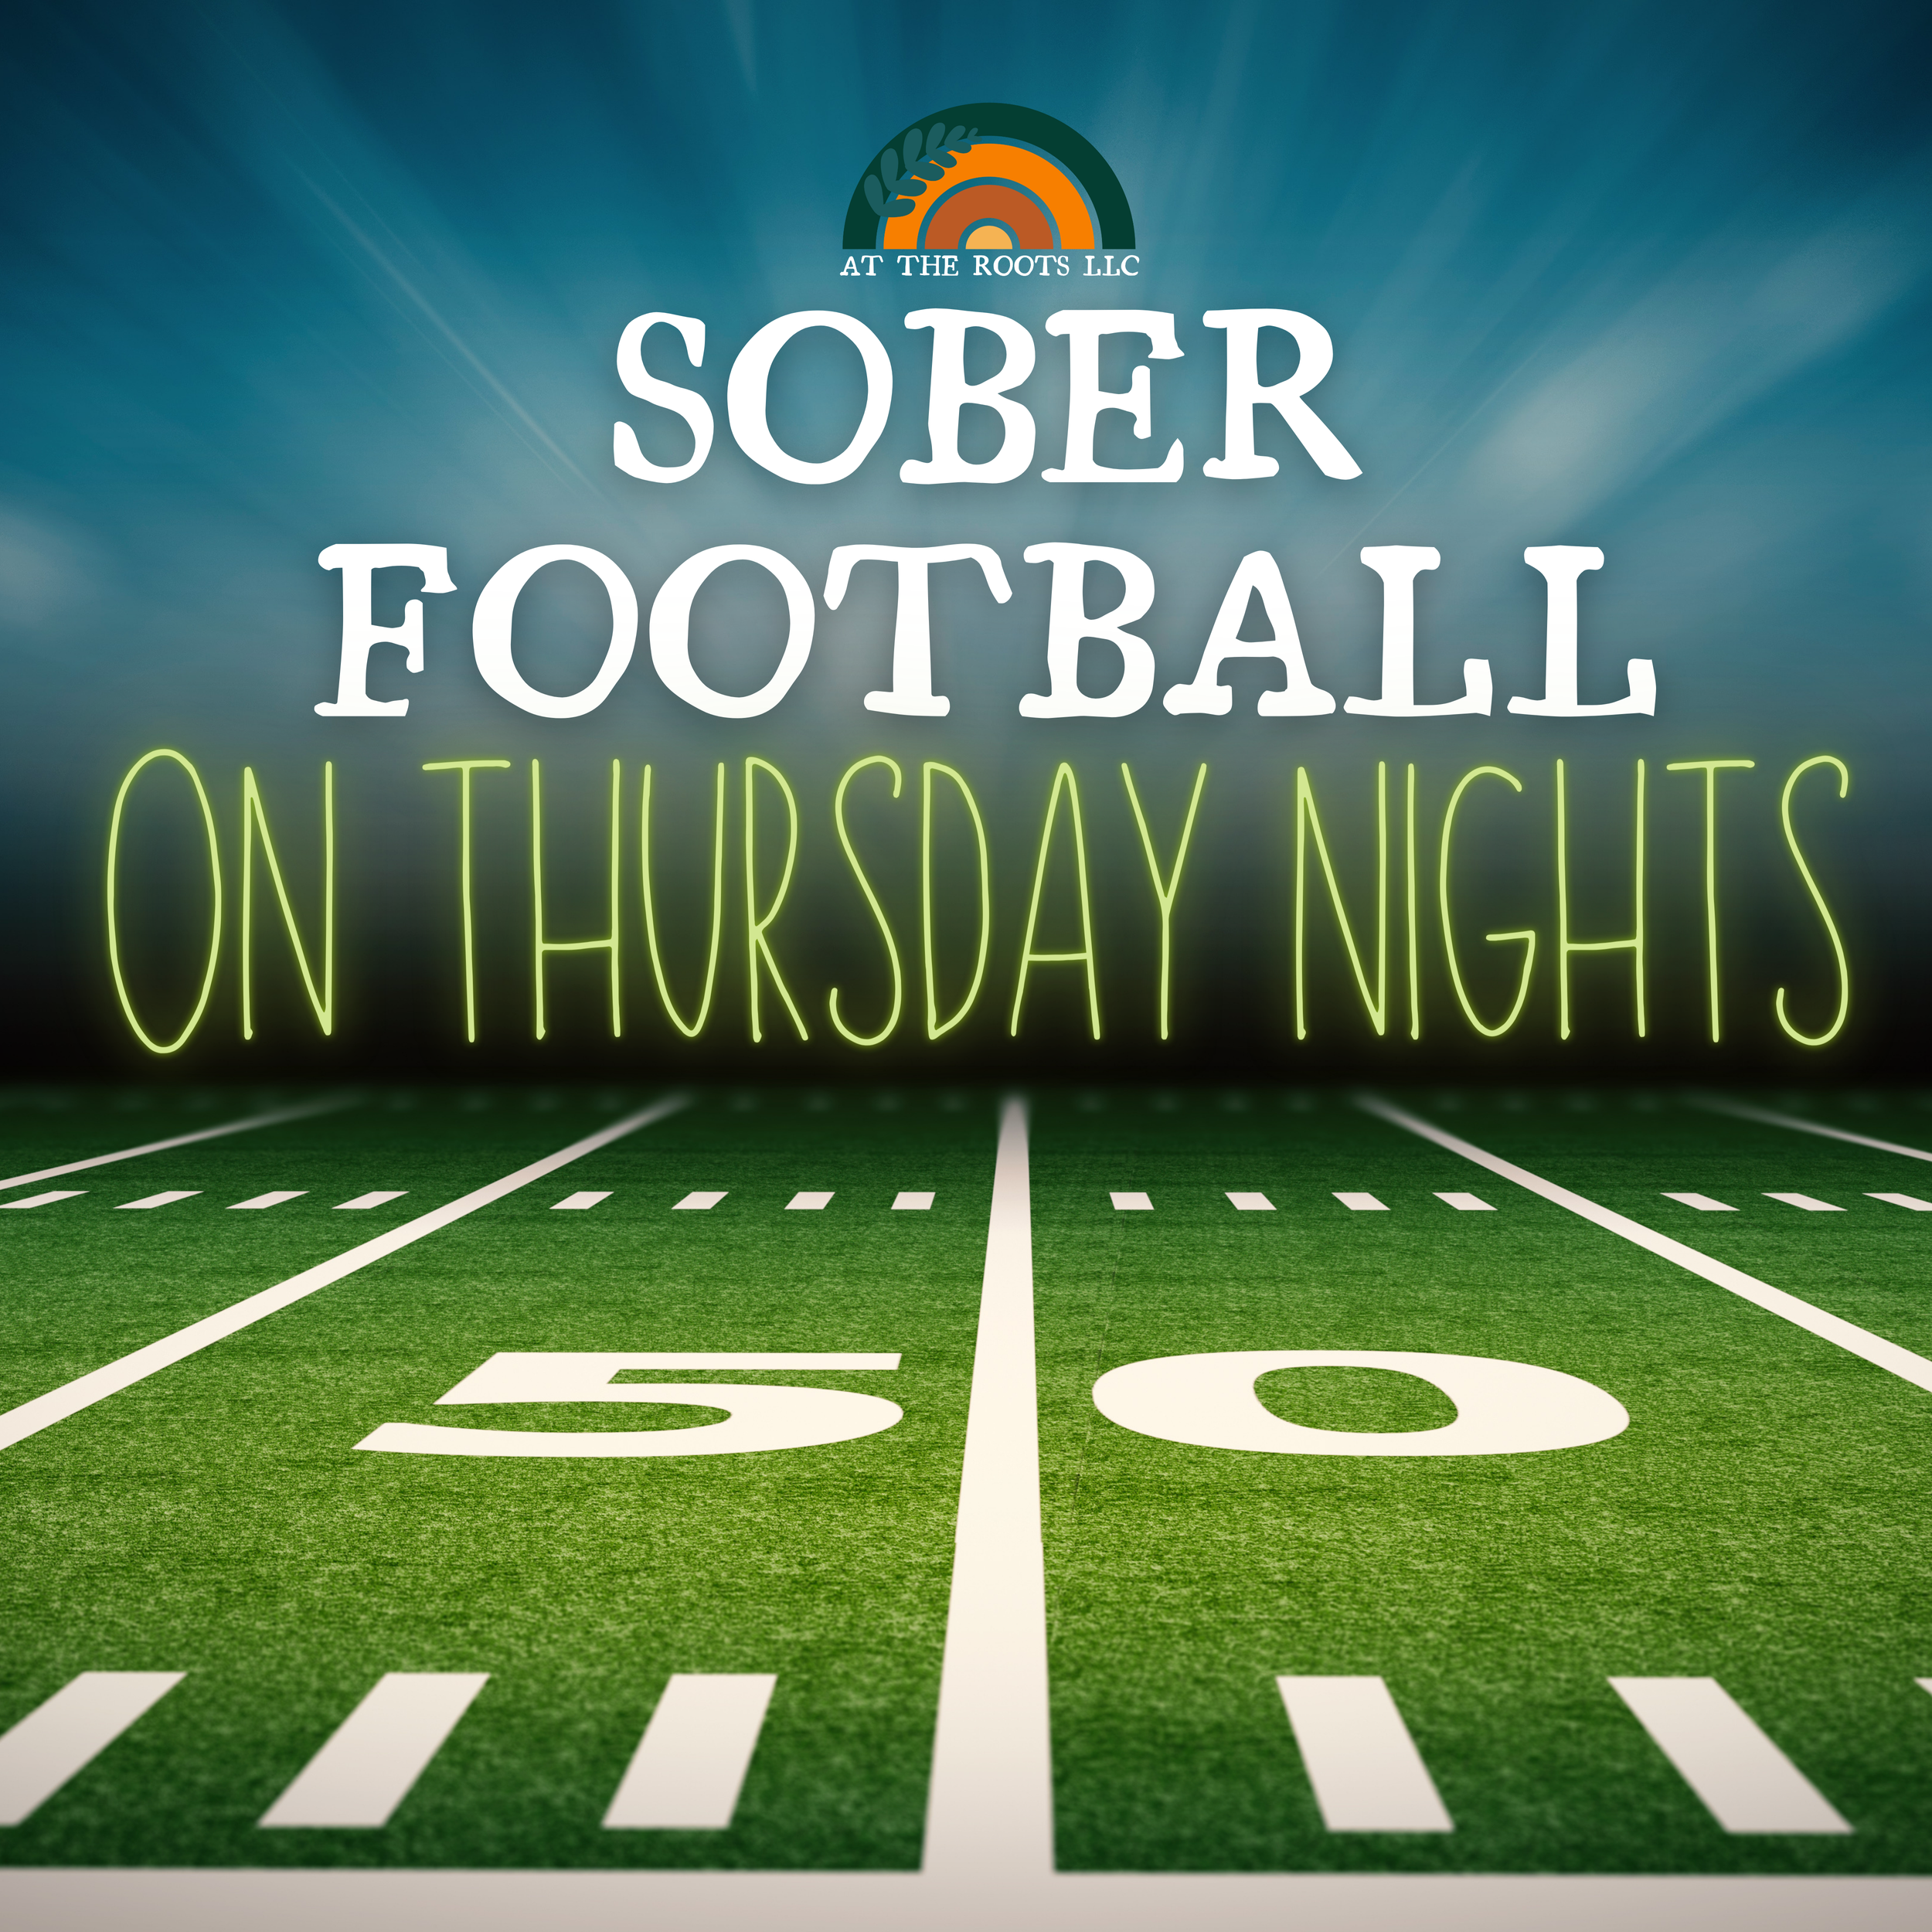 Sober Football on Thursday Nights — At The Roots LLC